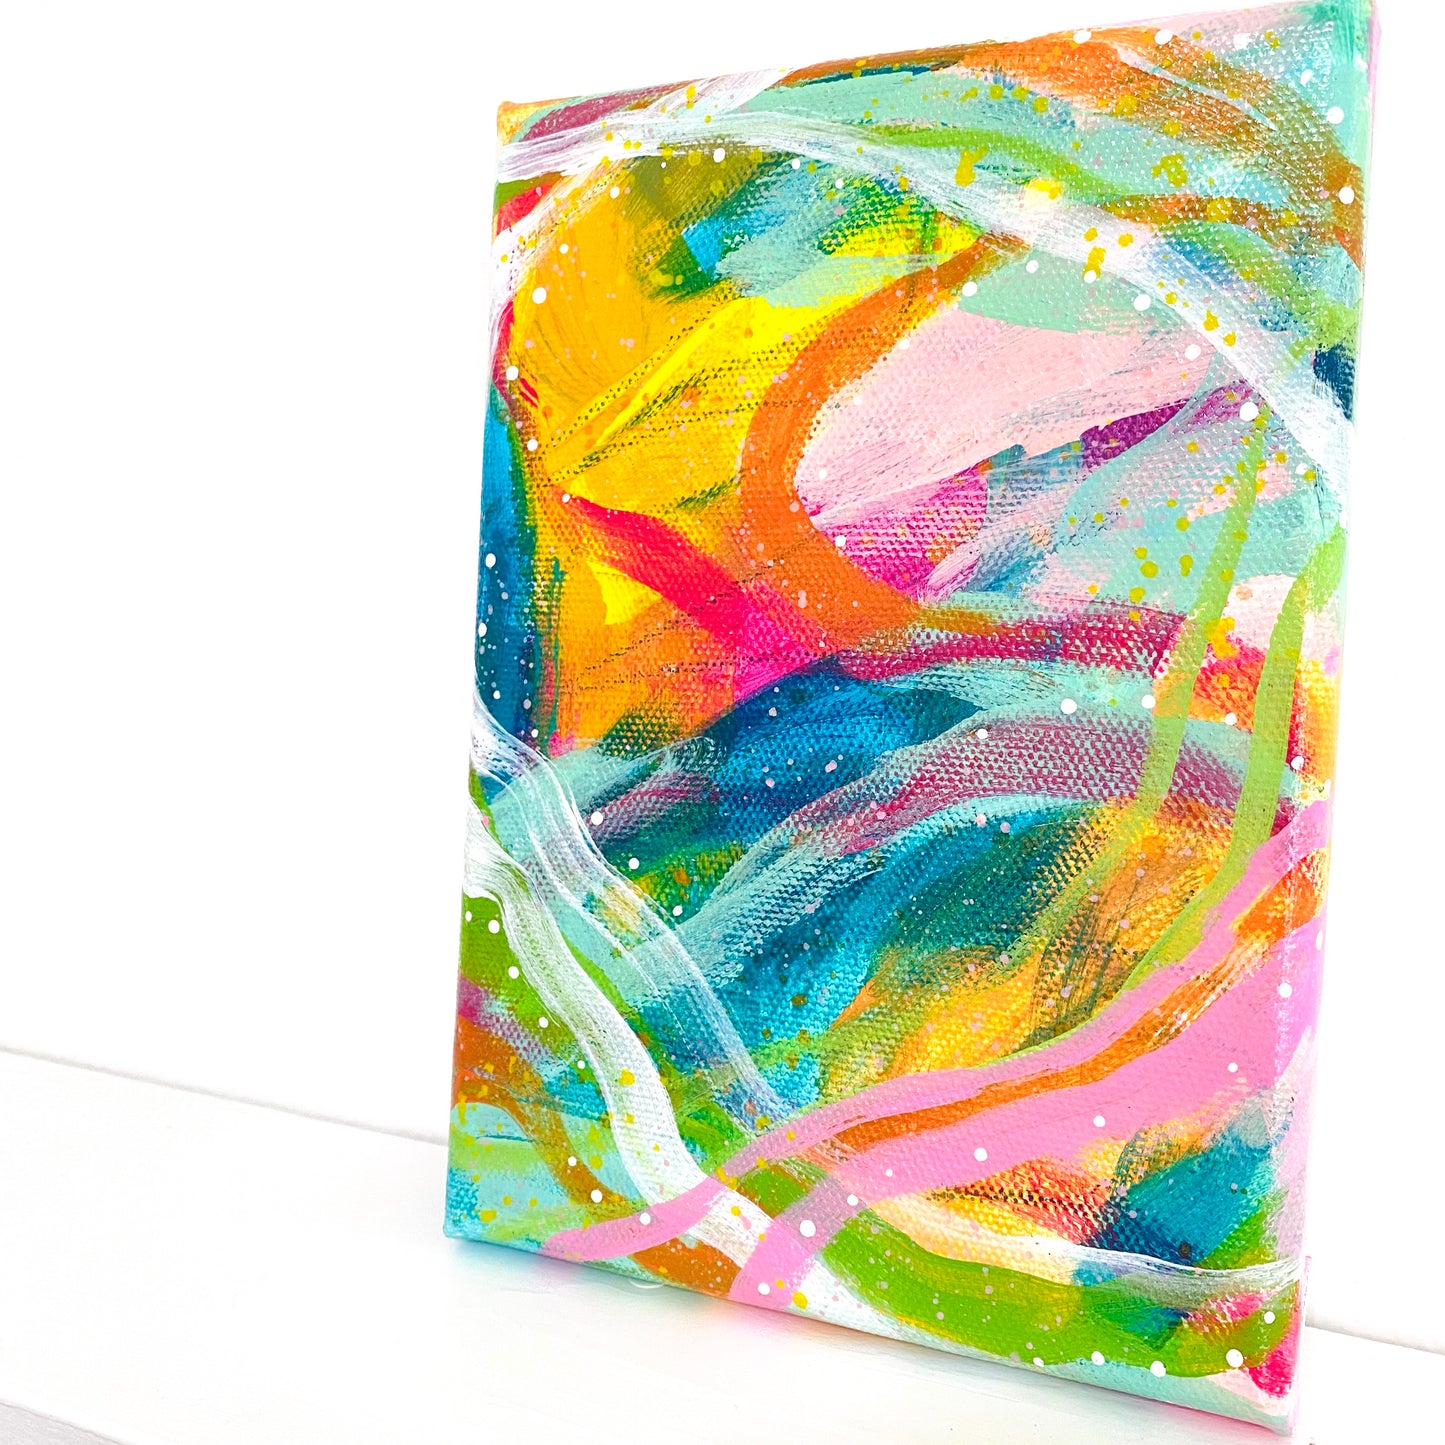 Waves of Color #2 5x7 inch abstract original canvas